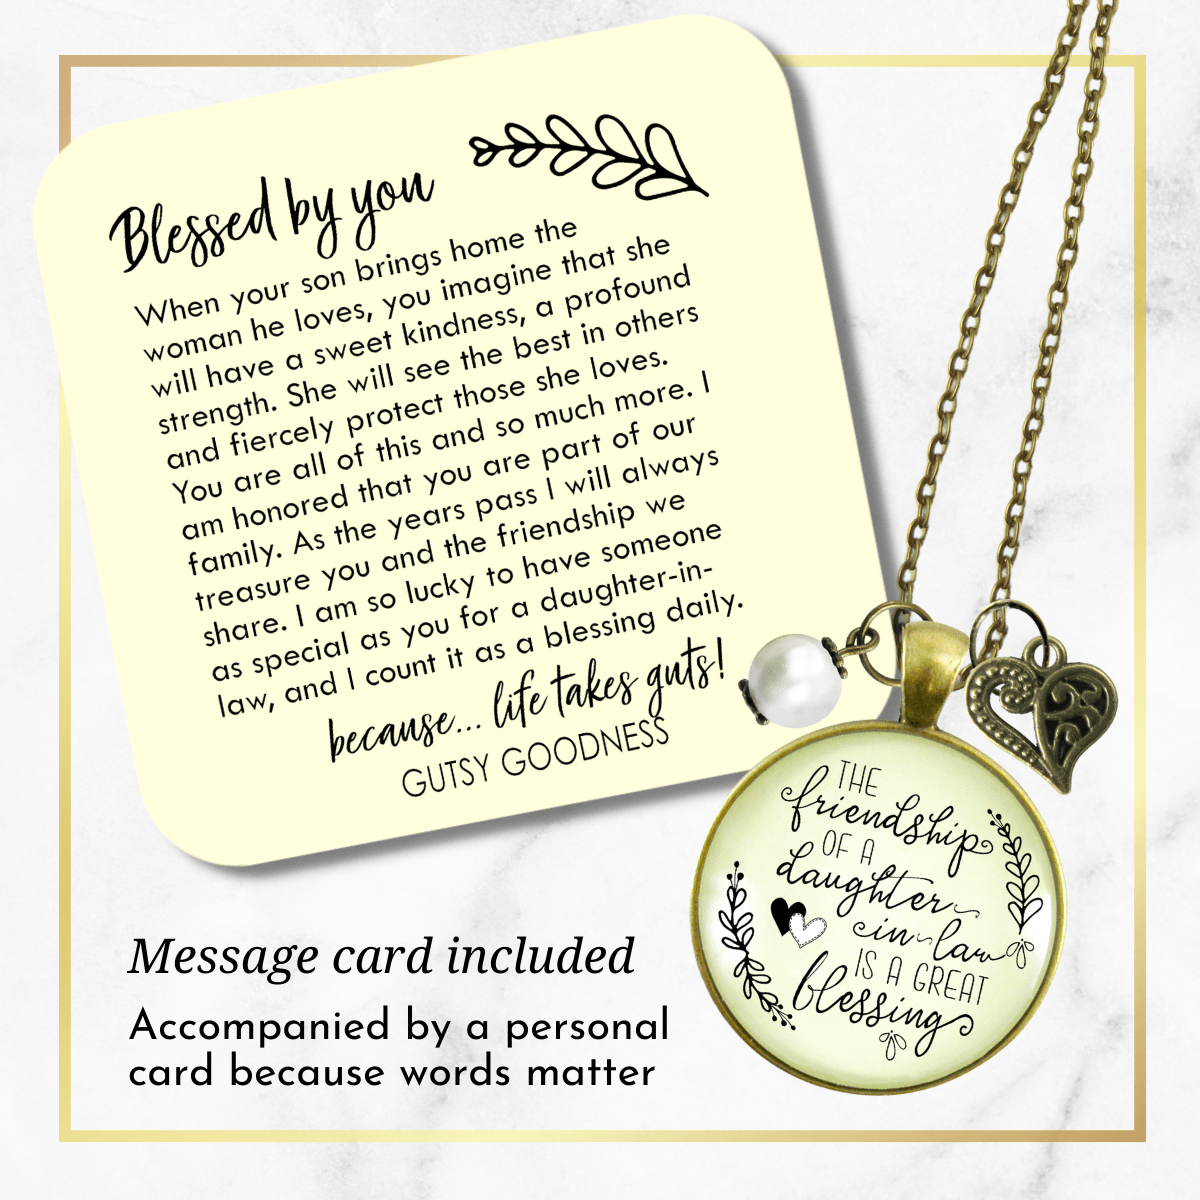 Gutsy Goodness Daughter in Law Necklace Friendship Blessing Gift from Mom Wedding Jewelry - Gutsy Goodness Handmade Jewelry;Daughter In Law Necklace Friendship Blessing Gift From Mom Wedding Jewelry - Gutsy Goodness Handmade Jewelry Gifts